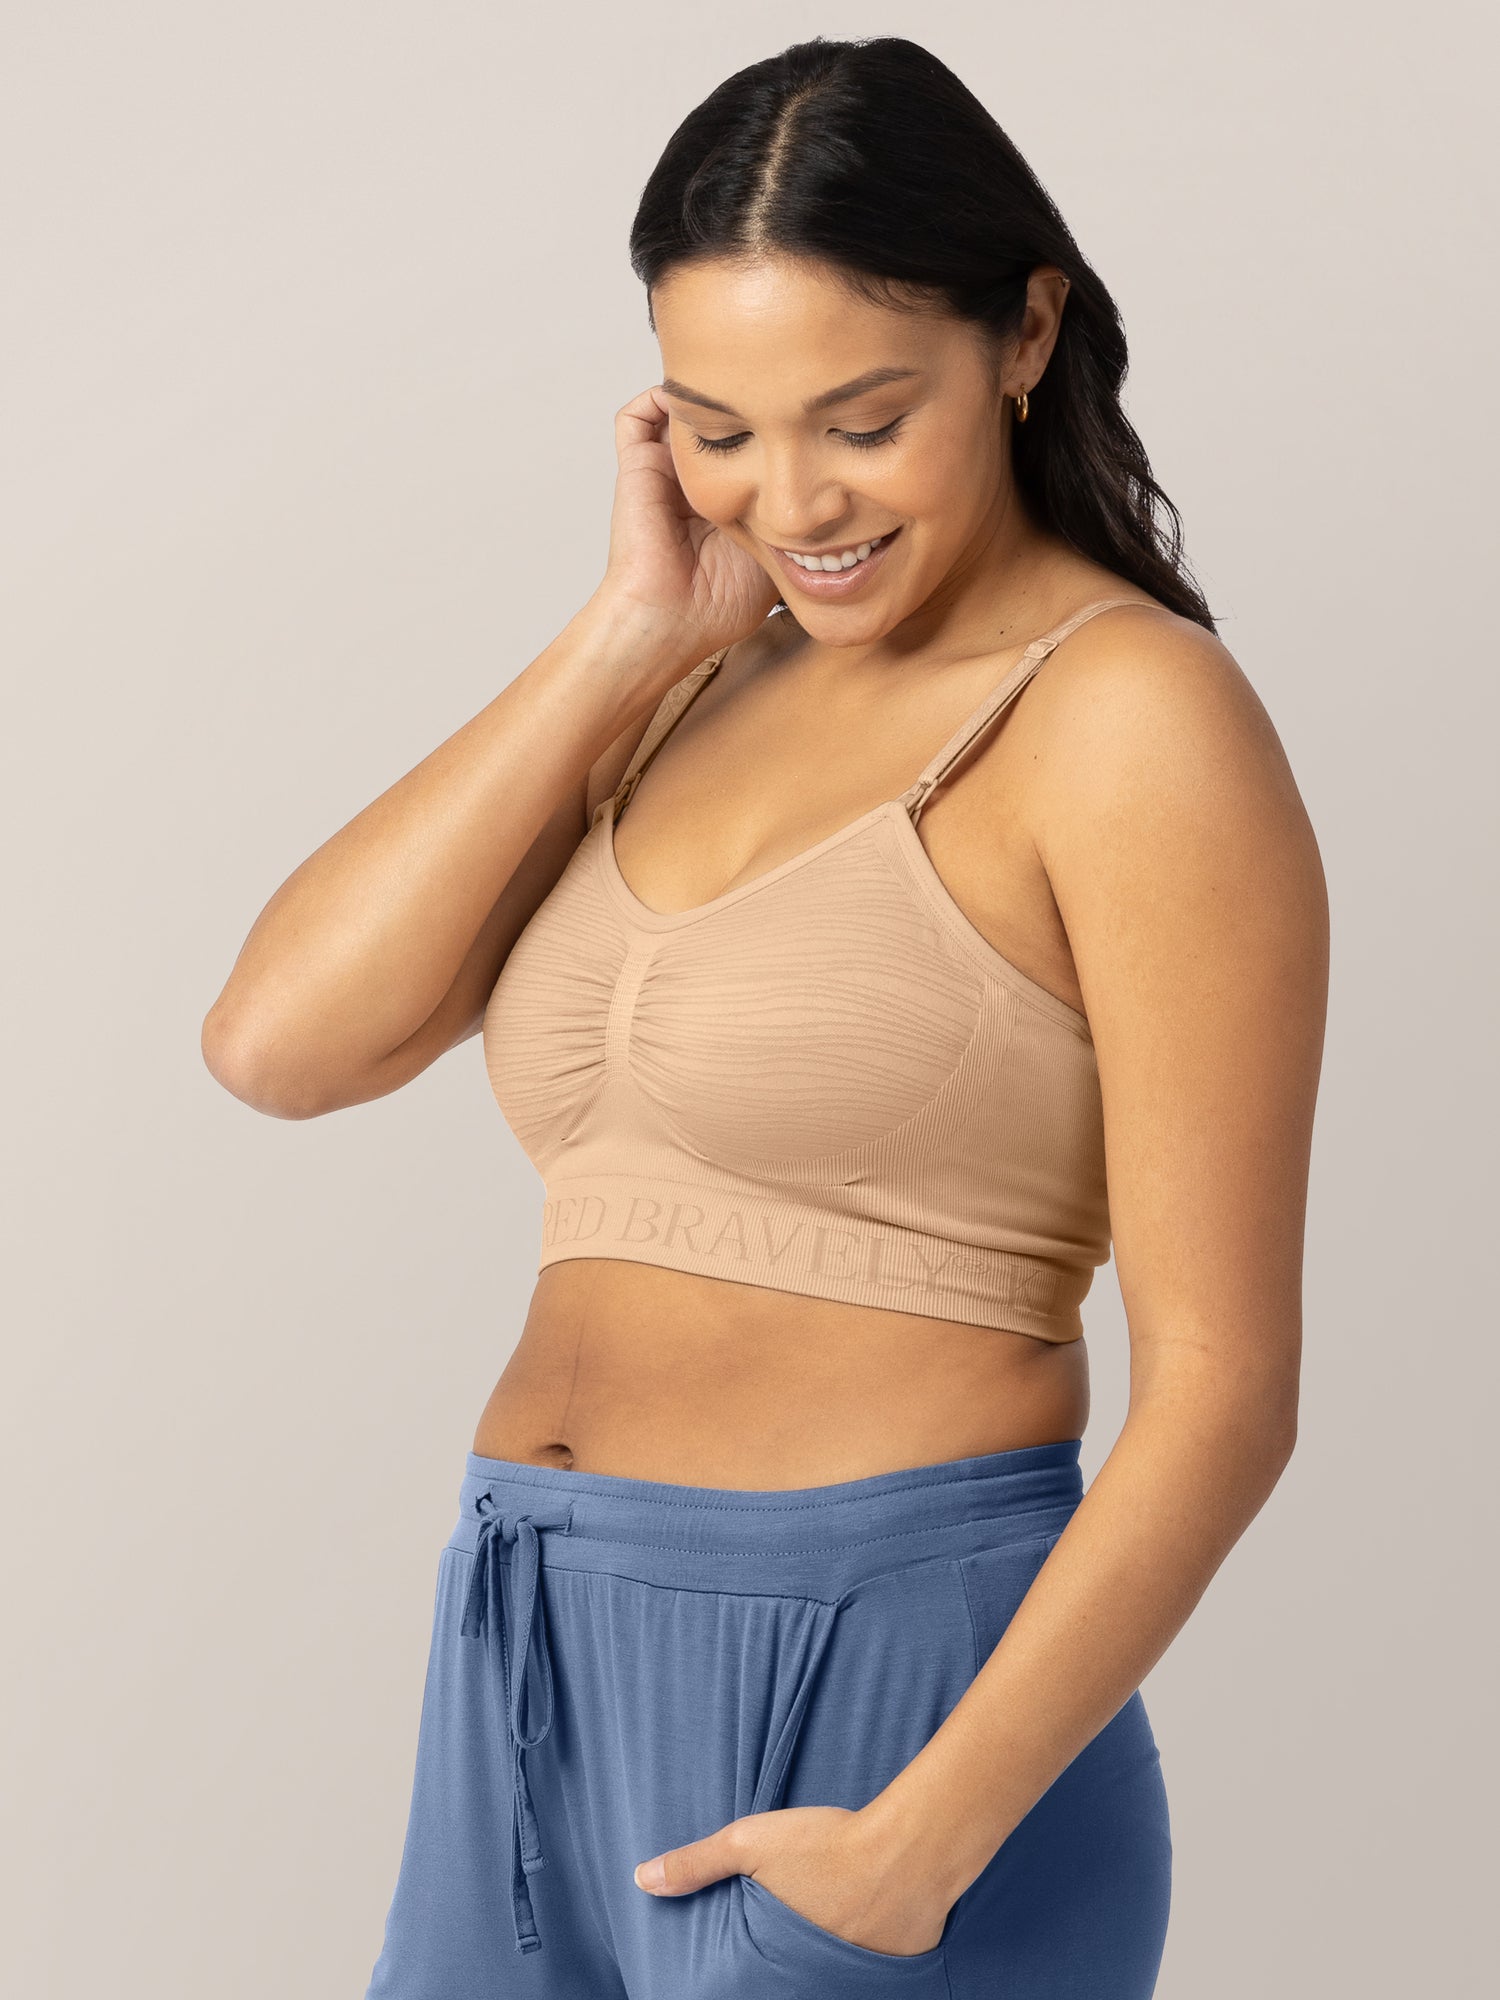 Momcozy Hands-Free Pumping Bra, Adjustable Breast-Pump Holding and Nursing  Bra for Spectra, Medela, Elvie, Willow and More